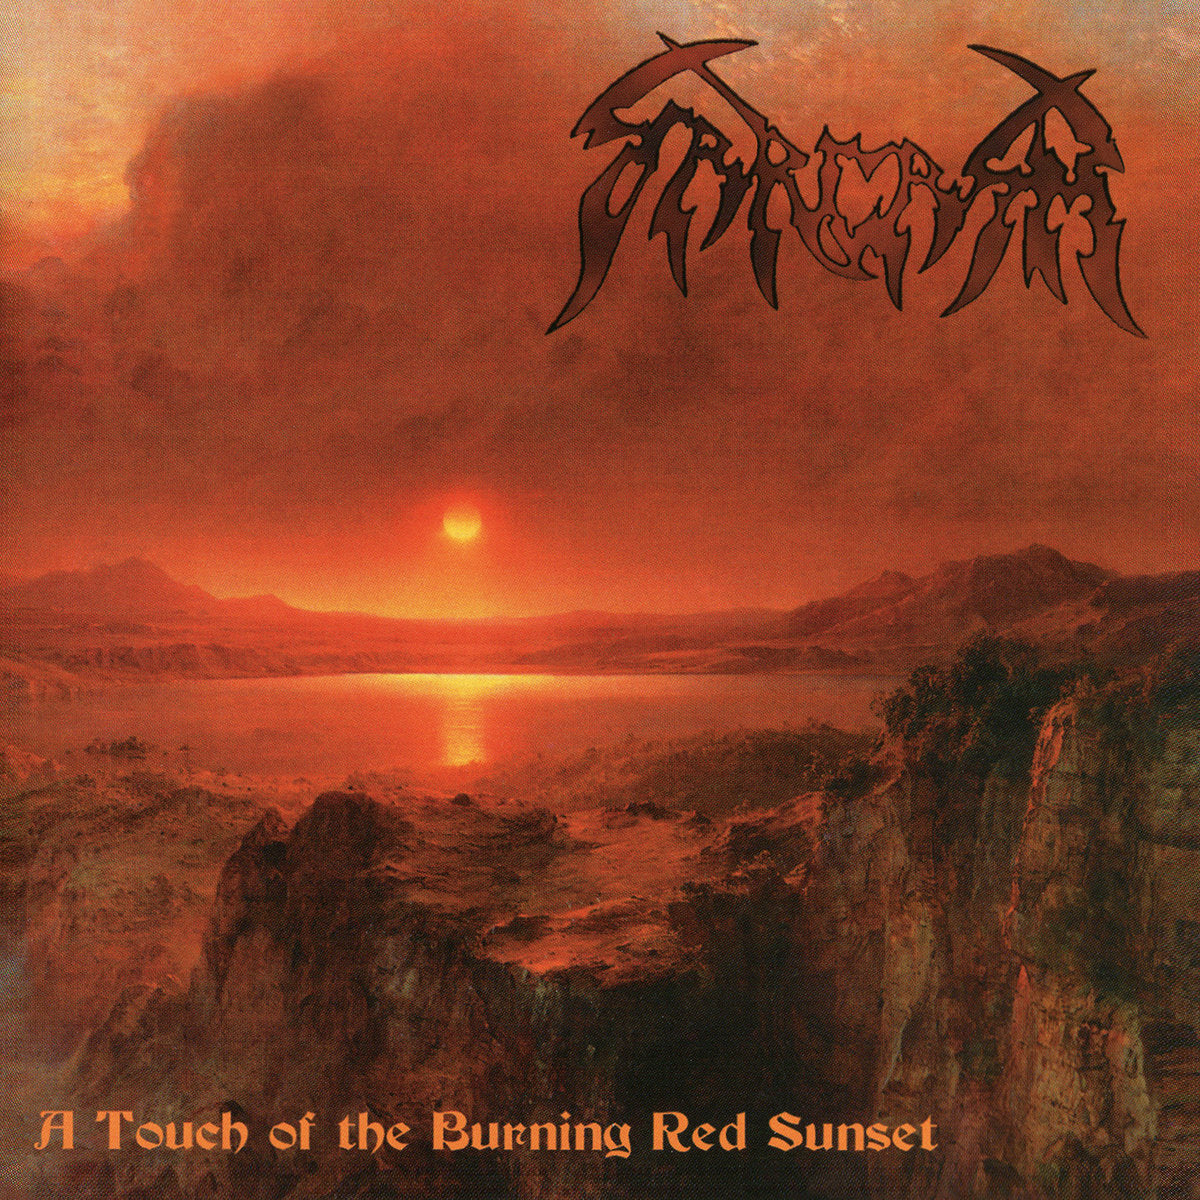 SARCASM – A Touch Of The Burning Red Sunset LP (RUSTY RED) (PREORDER)